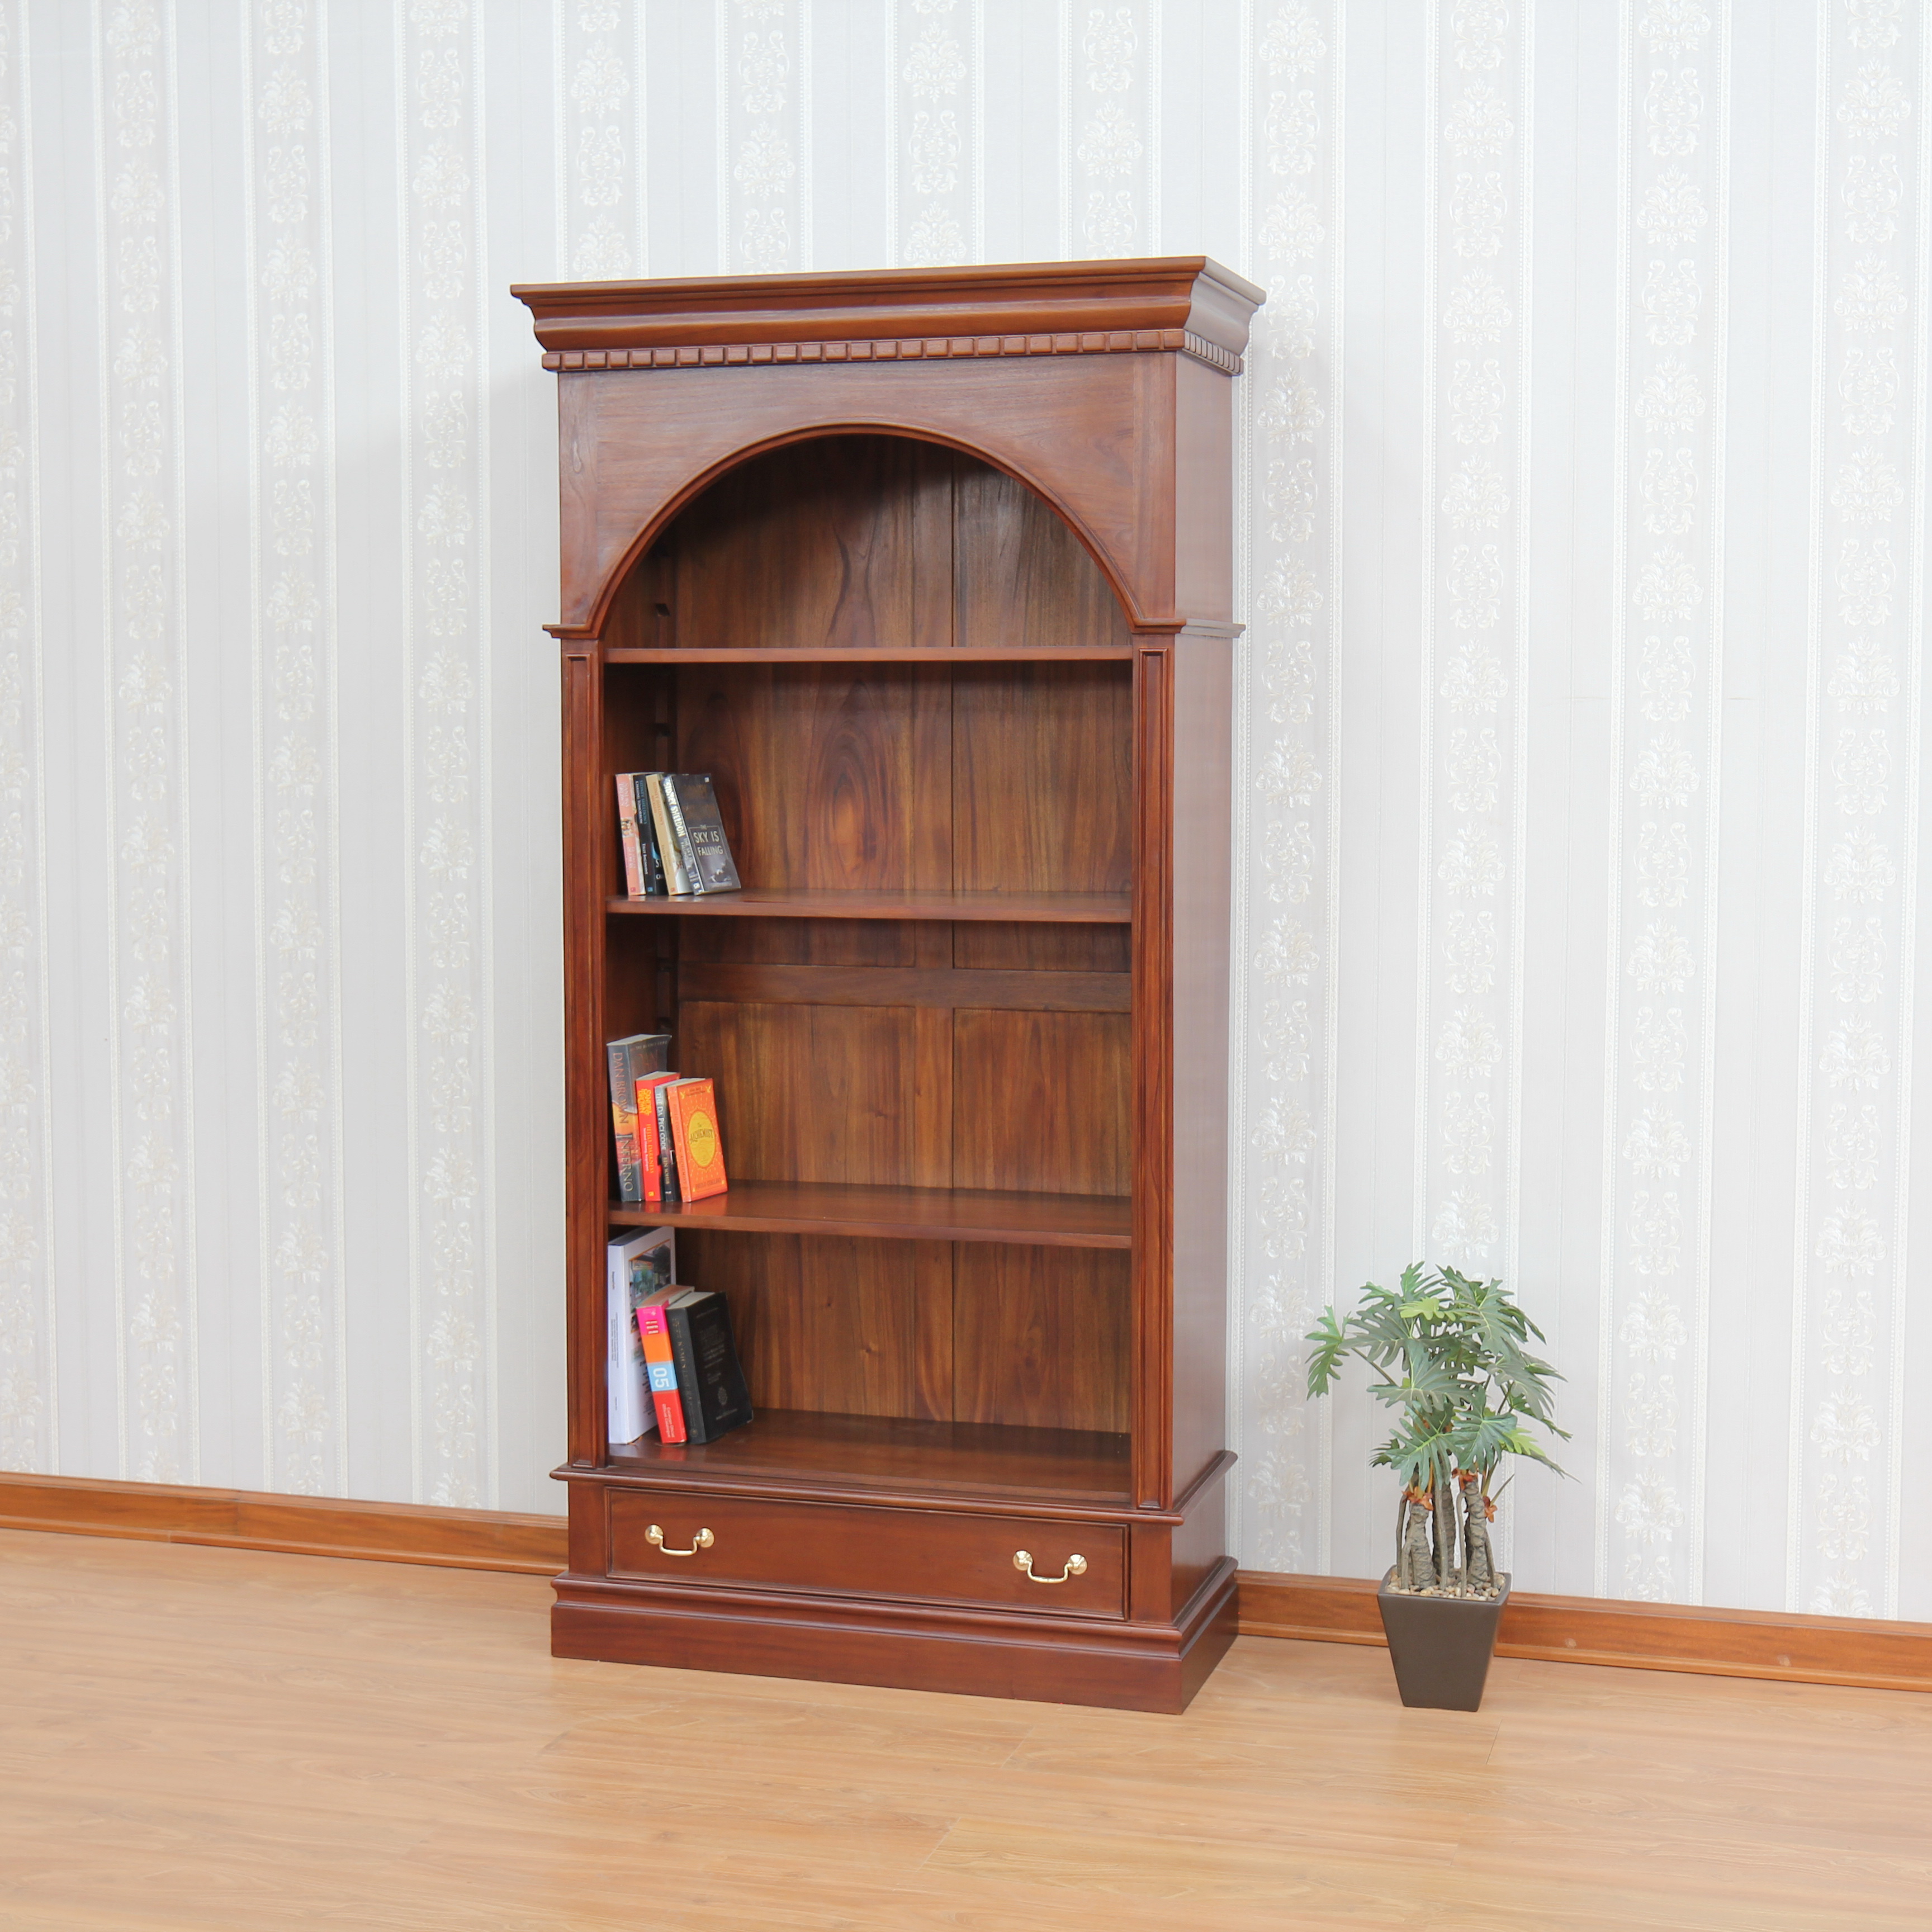 Creatice Arched Bookcase for Living room